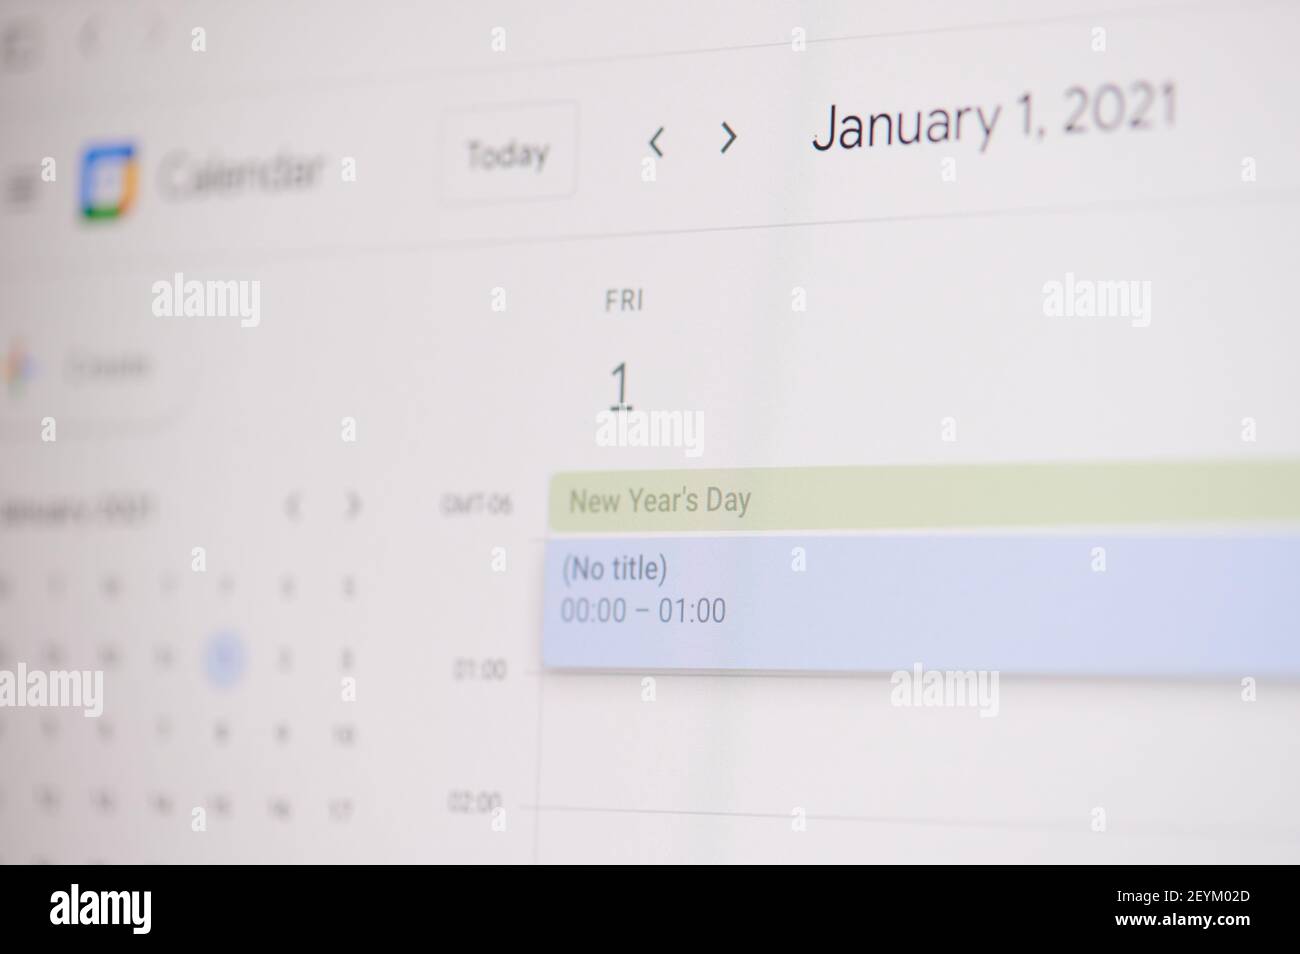 New york, USA - February 17, 2021: New year day 1 of january  on google calendar on laptop screen close up view. Stock Photo